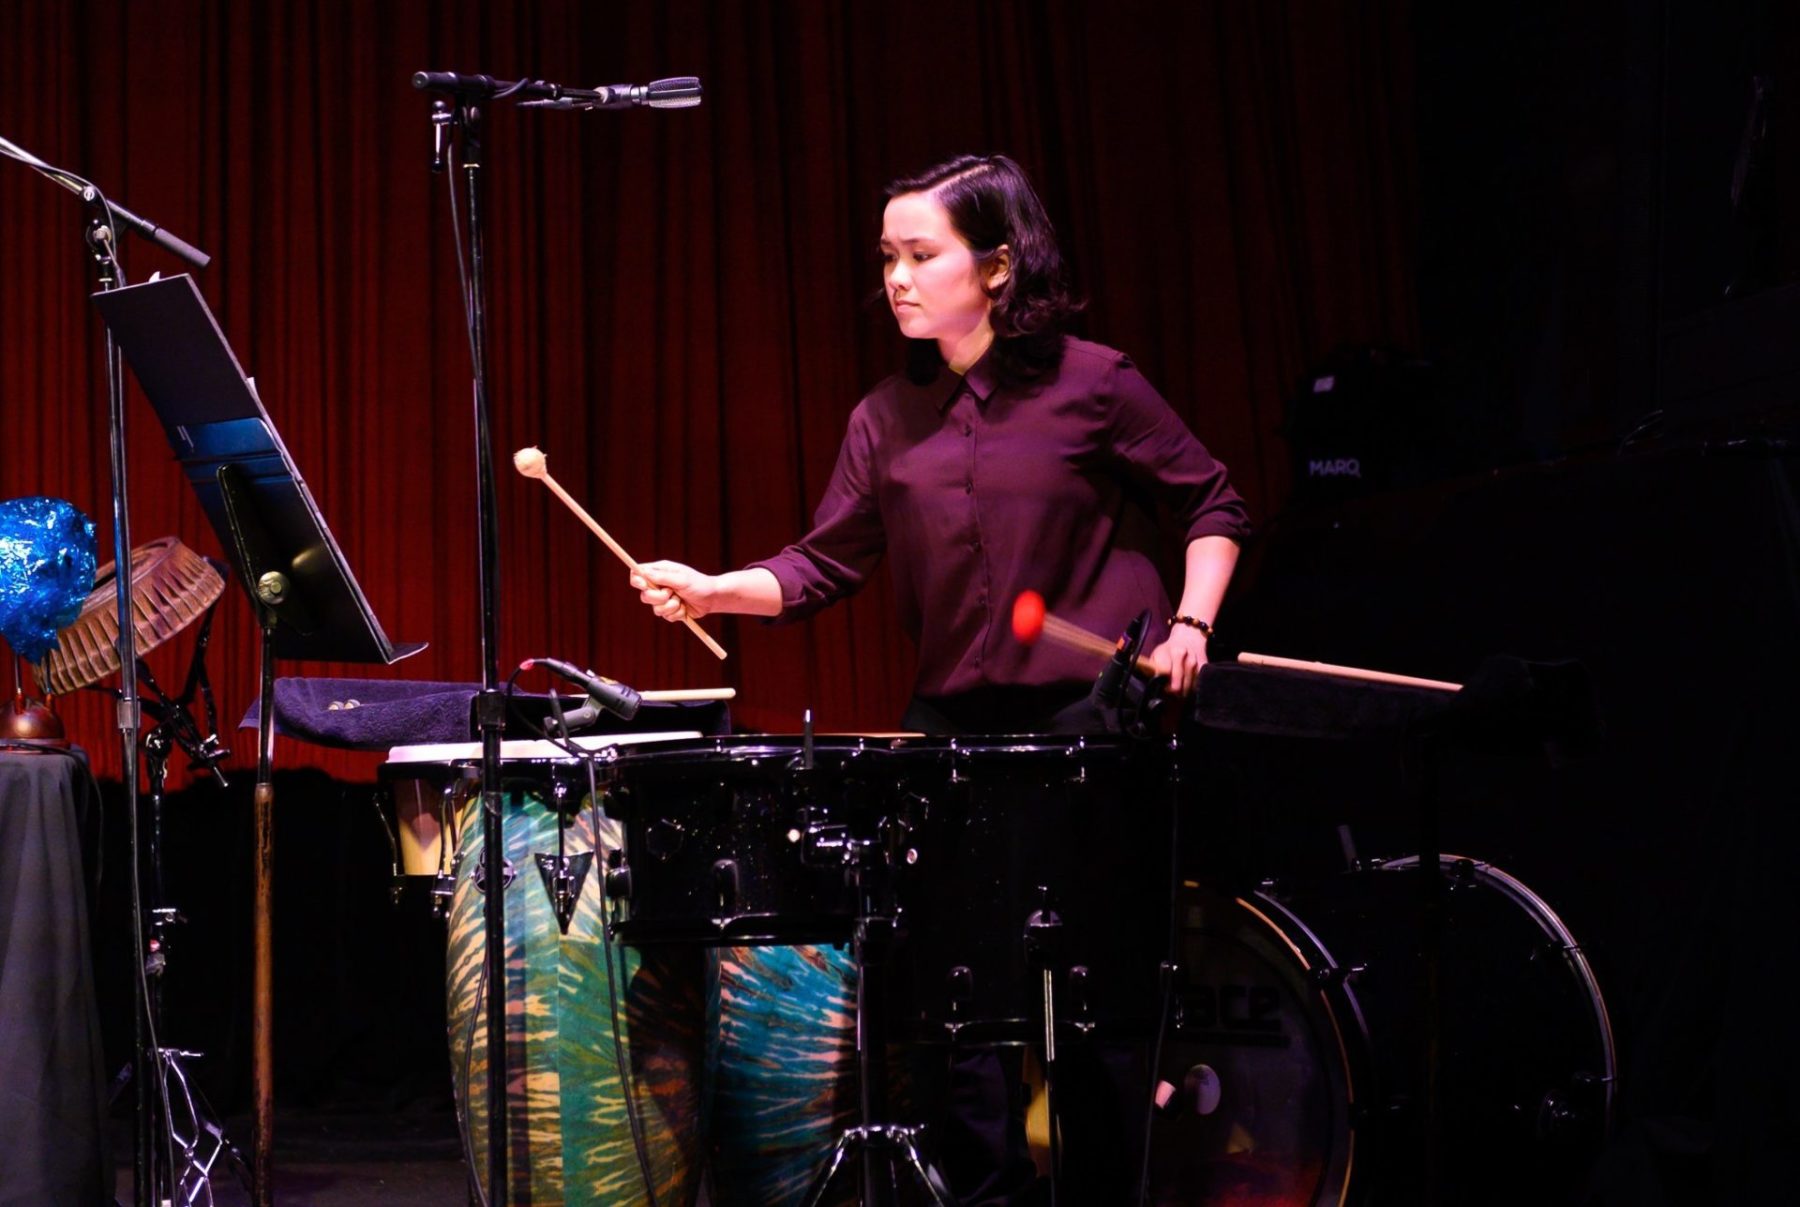 Julia Chien in a purple shirt holding two mallets and playing the drums